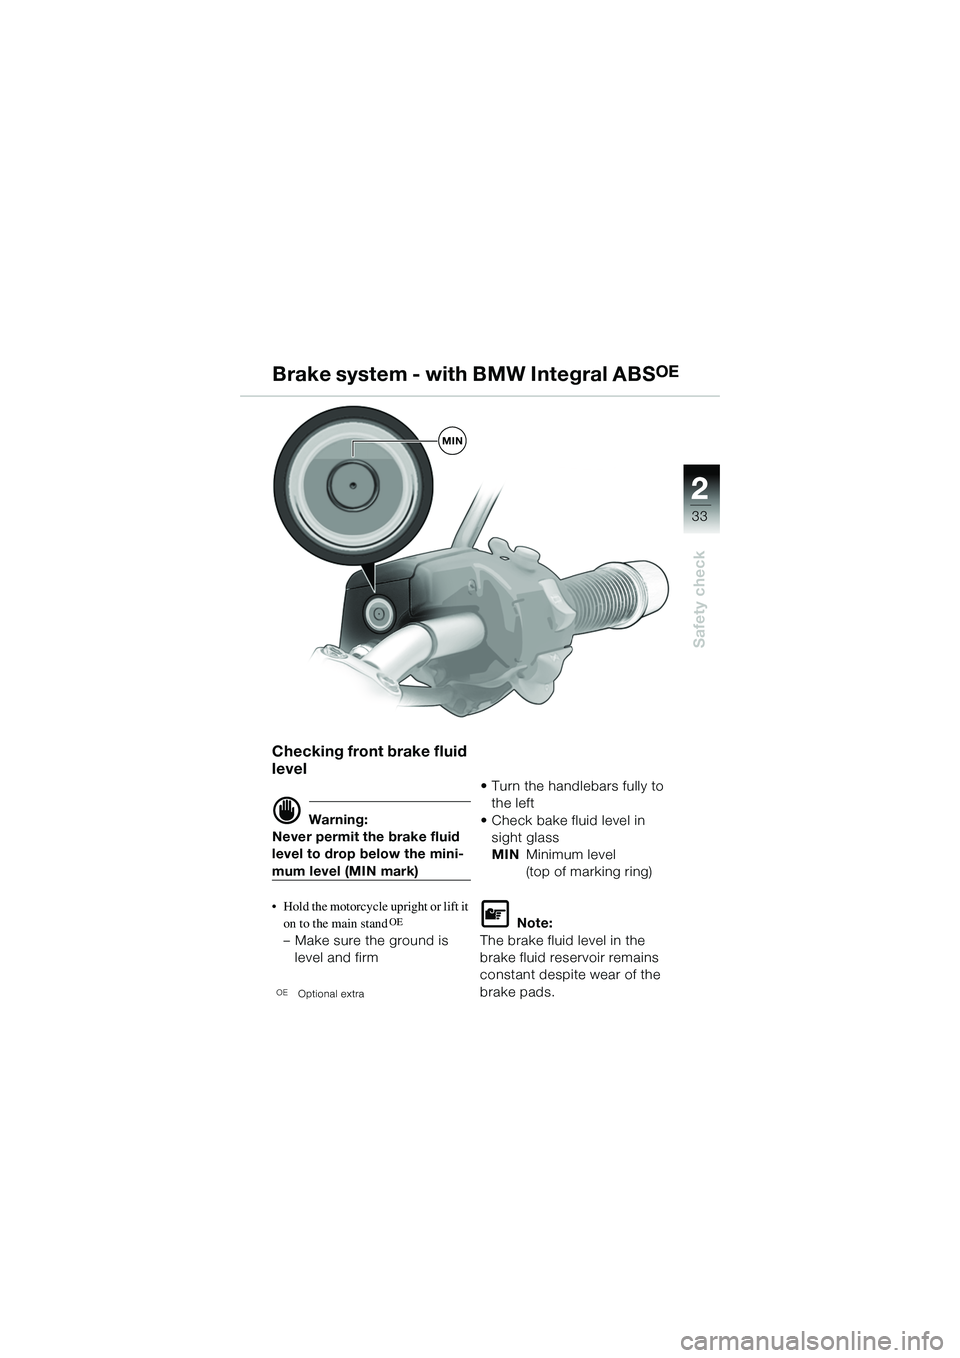 BMW MOTORRAD R 1150 R 2002  Riders Manual (in English) 2
33
2
Safety check
MIN
Brake system - with BMW Integral ABSOE
Checking front brake fluid 
level
d Warning:
Never permit the brake fluid 
level to drop below the mini-
mum level (MIN mark)
• Hold th